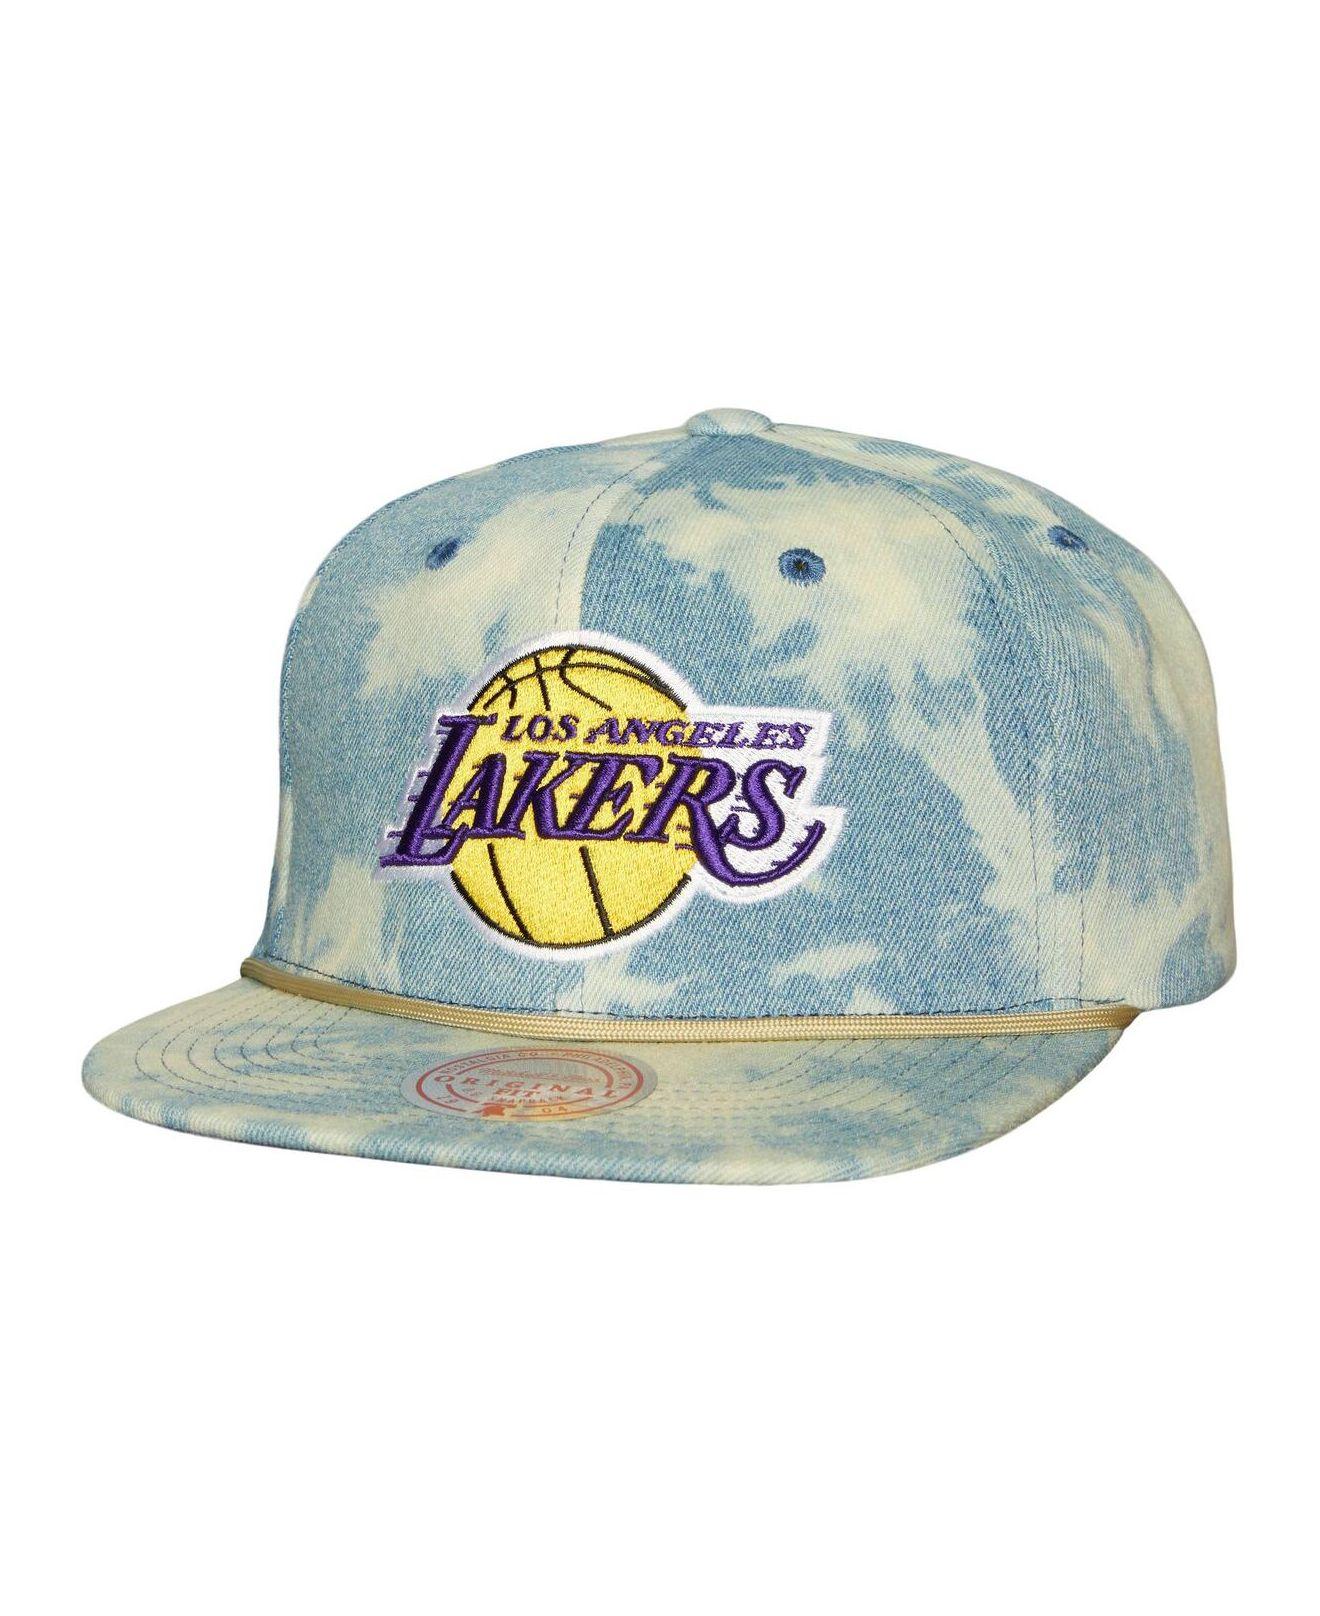 MITCHELL & NESS Los Angeles Lakers Mens Stretch Fitted Hat - BLACK